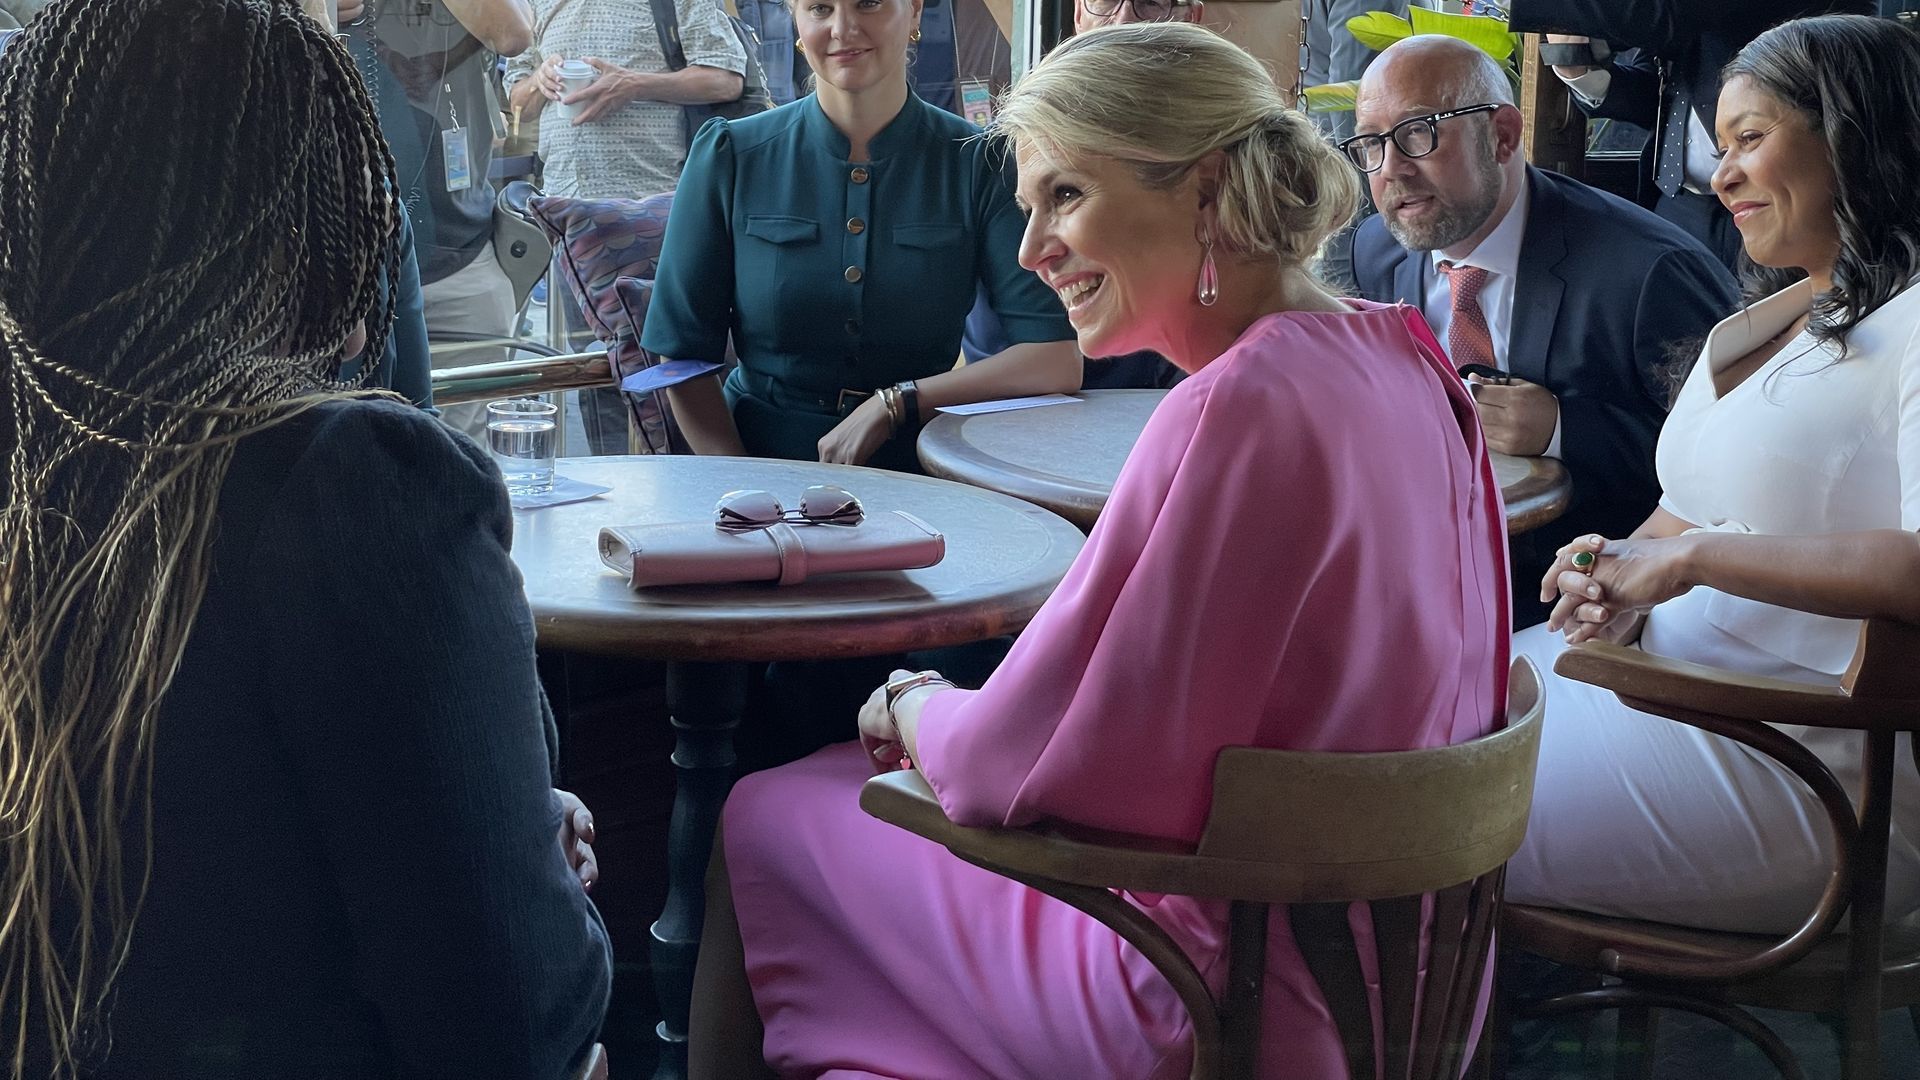 Queen Máxima of the Netherlands sitting at a table with SF Mayor London Breed.